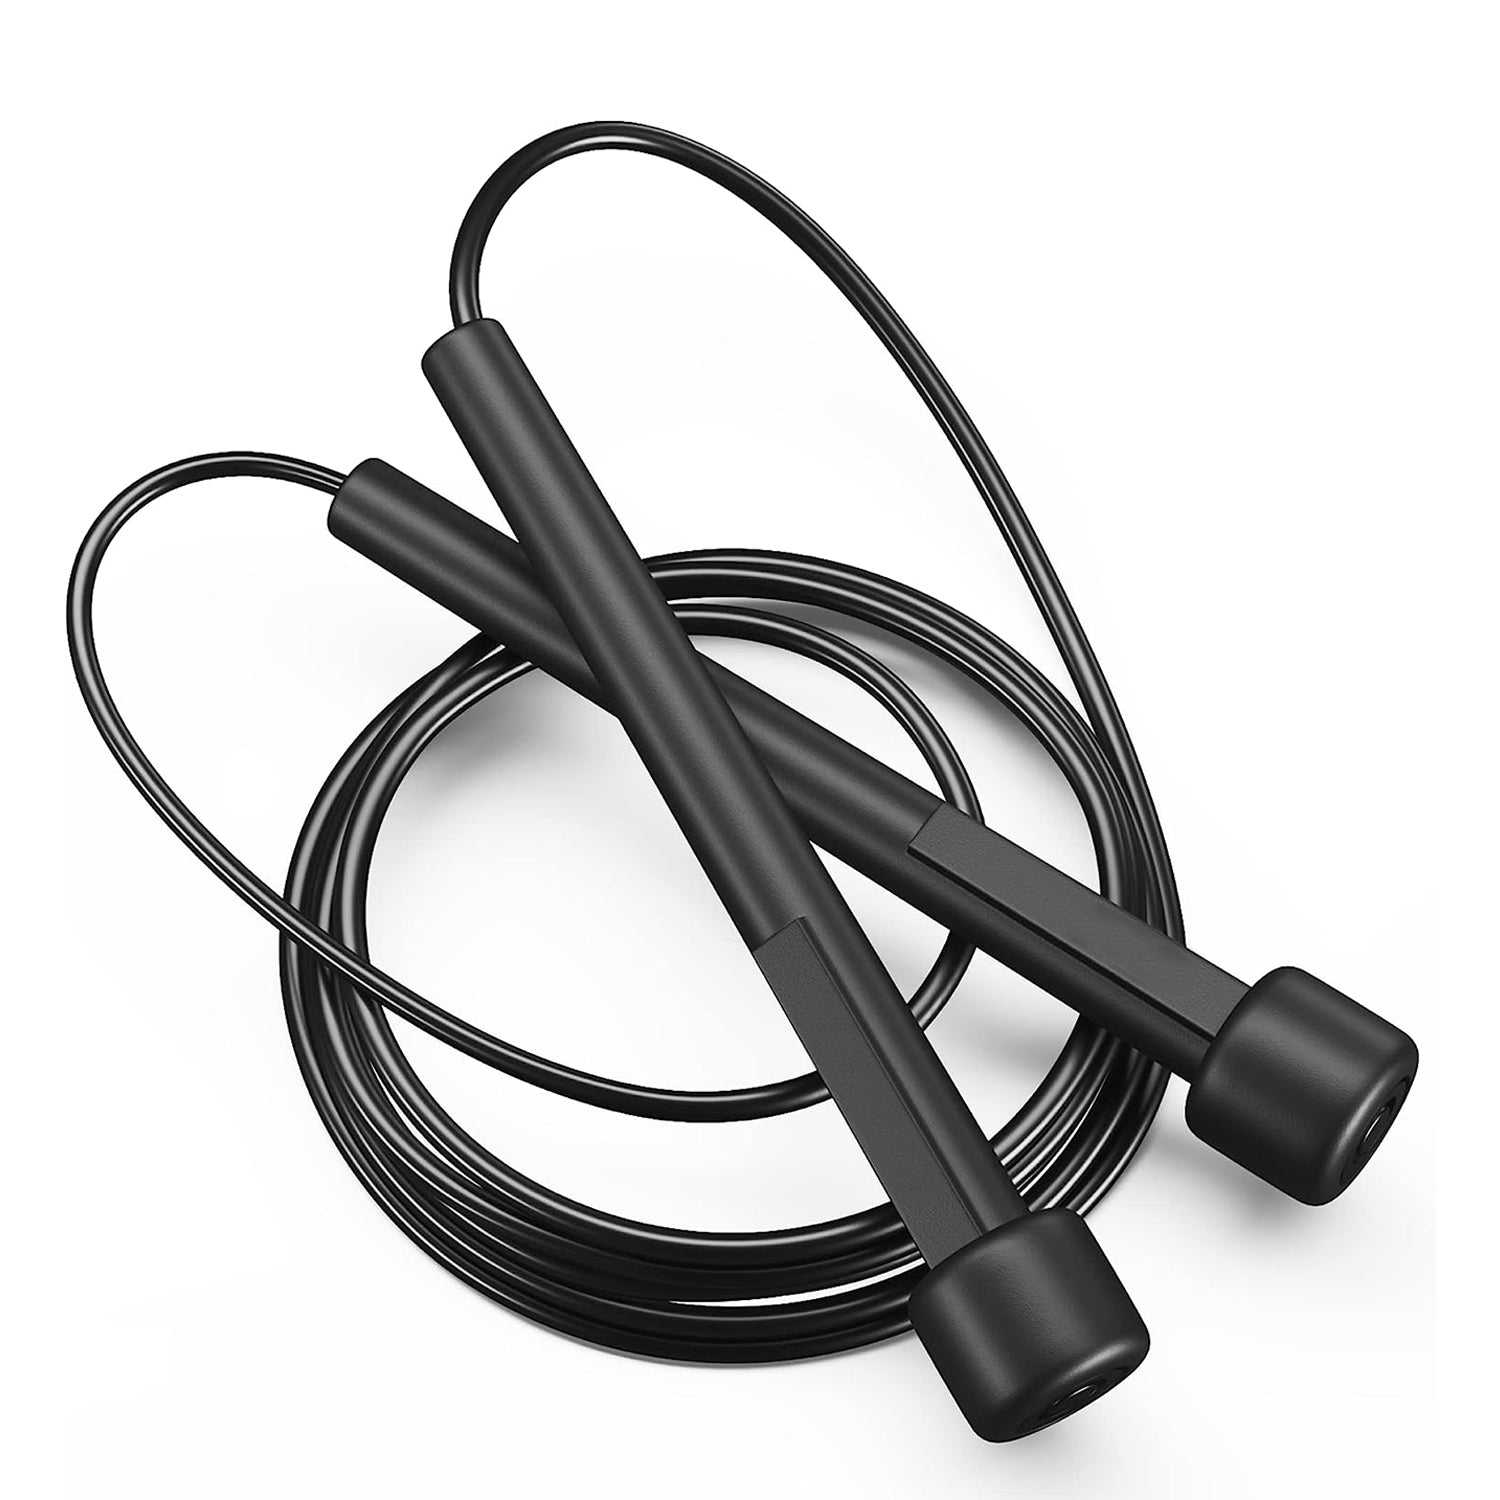  STARFIT Lightweight Jump Rope with Plastic Handles for Fitness  and Exercise - Adjustable - Tangle-Free Skipping Rope for Crossfit, Gym,  Cardio and Endurance Training, Workout (Black) : Sports & Outdoors